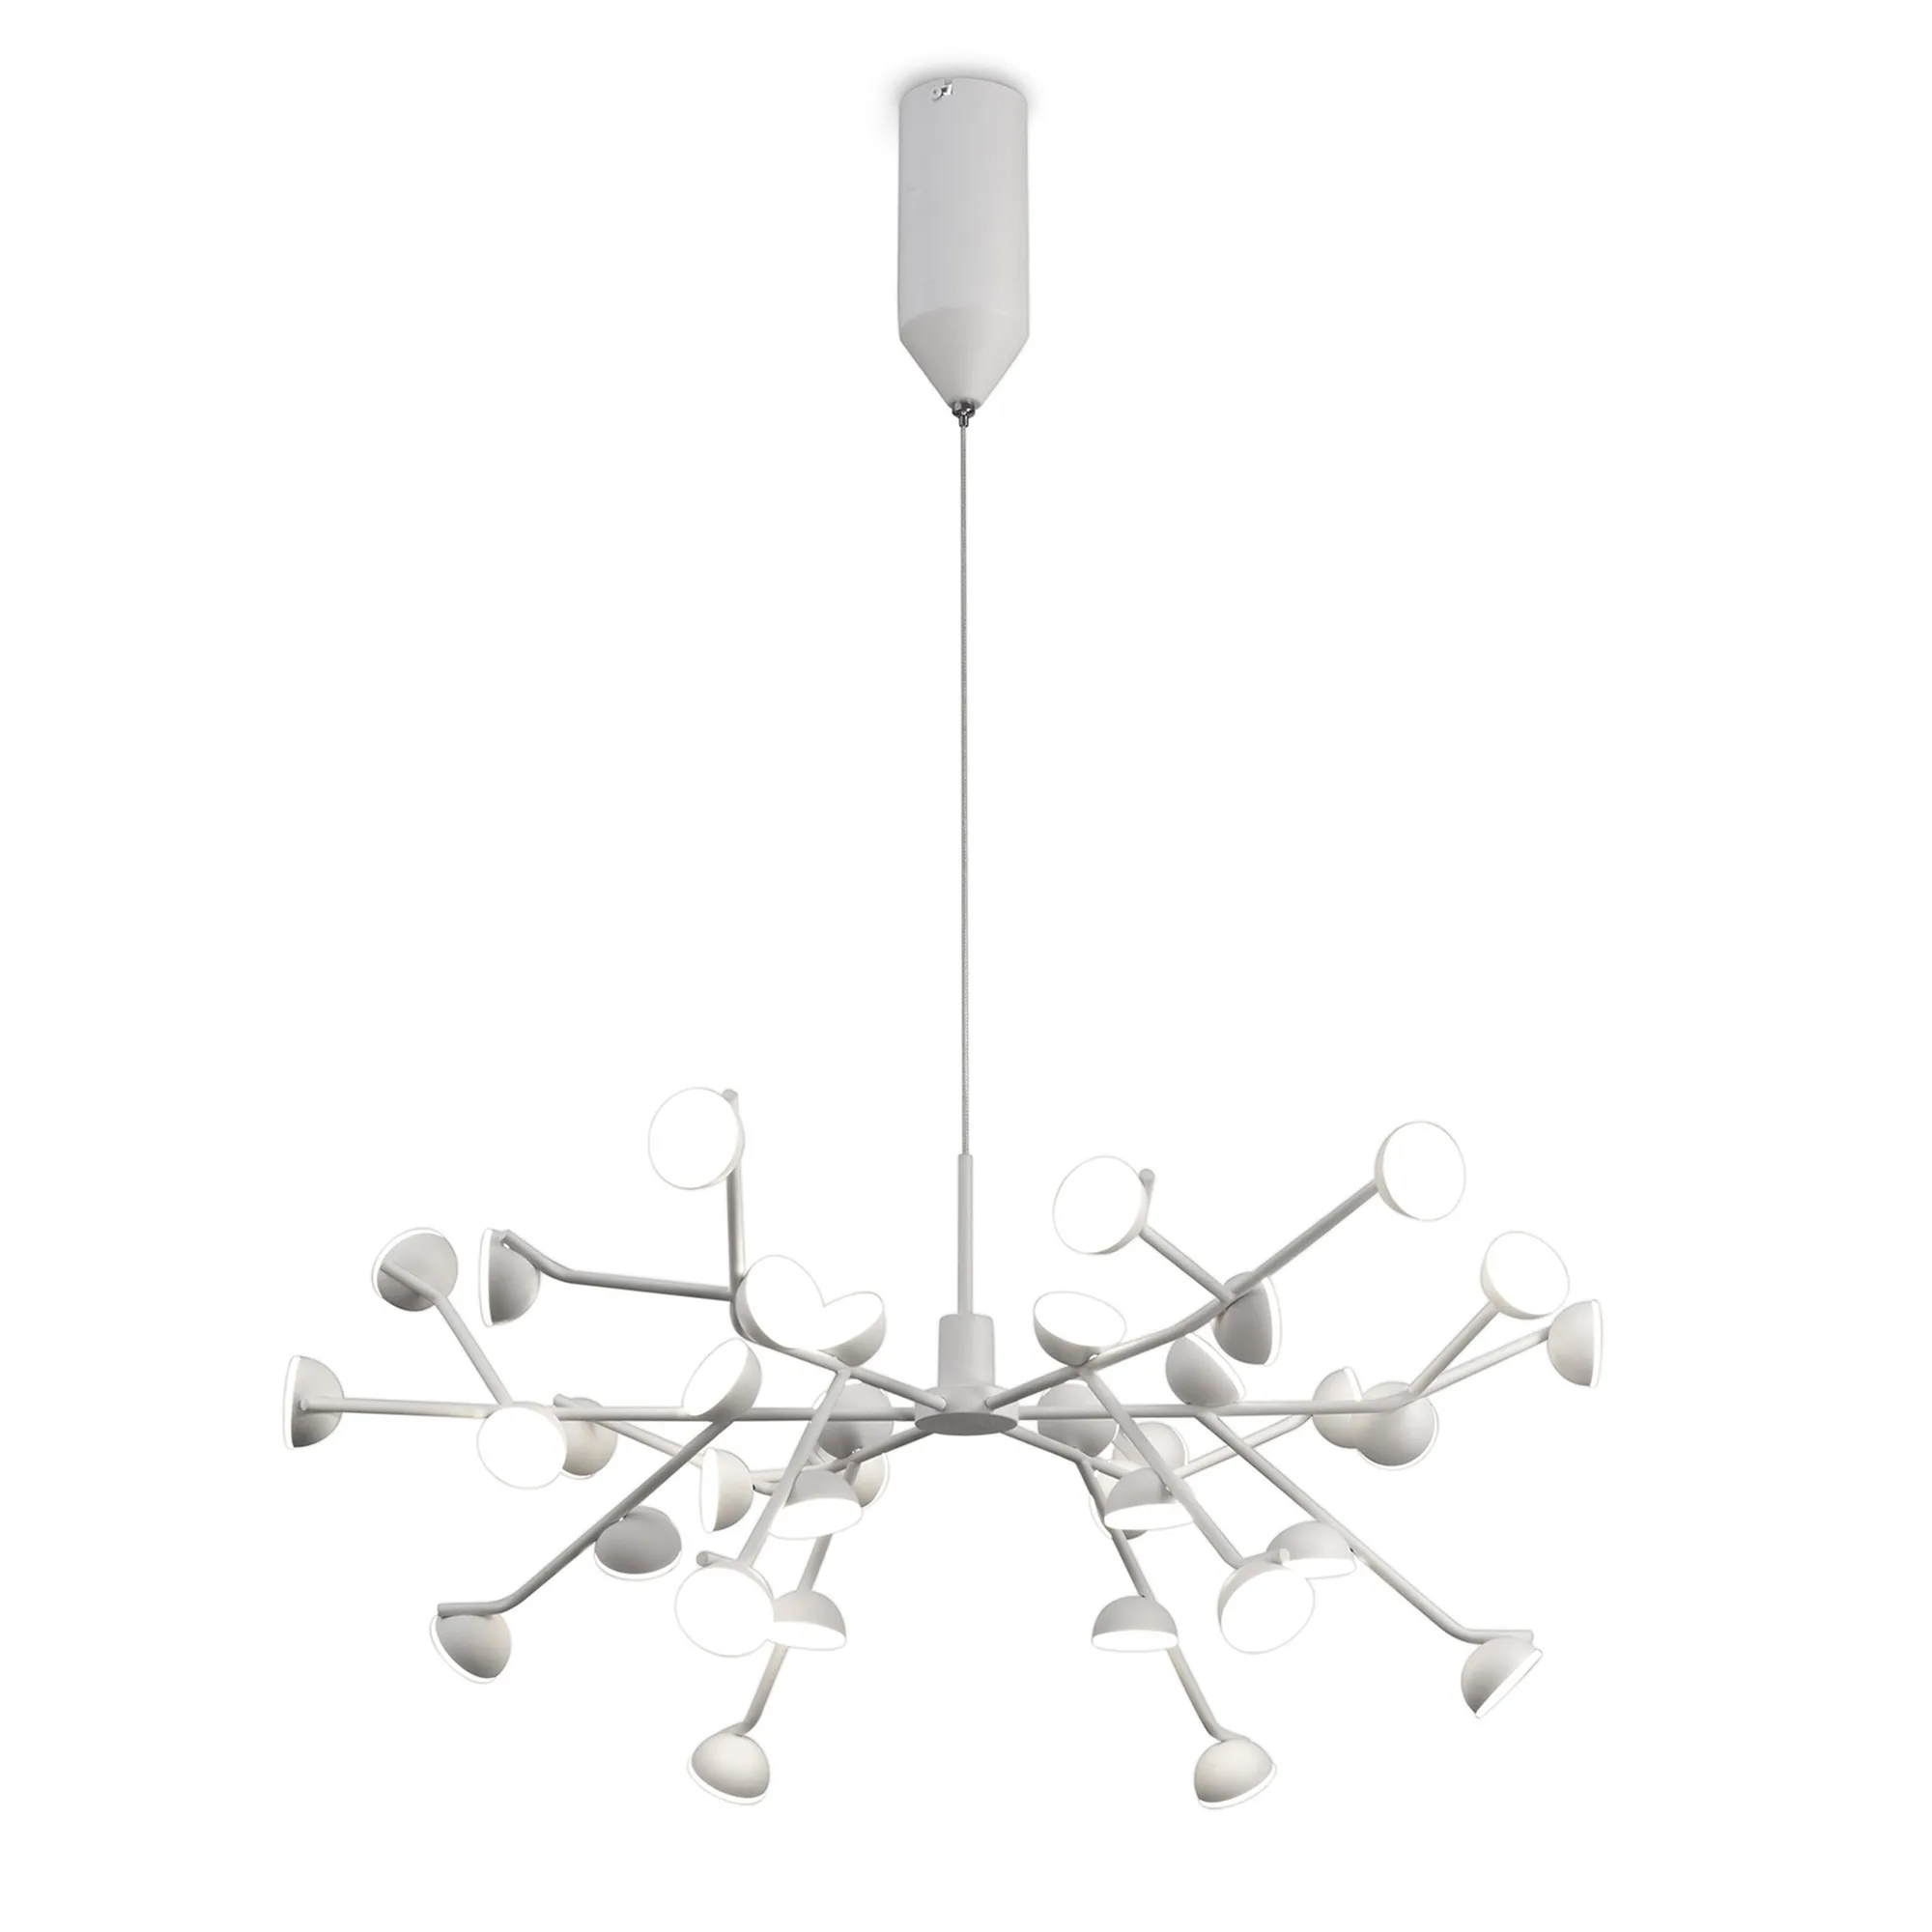 Adn White Ceiling Lights Mantra Multi Arm Fittings